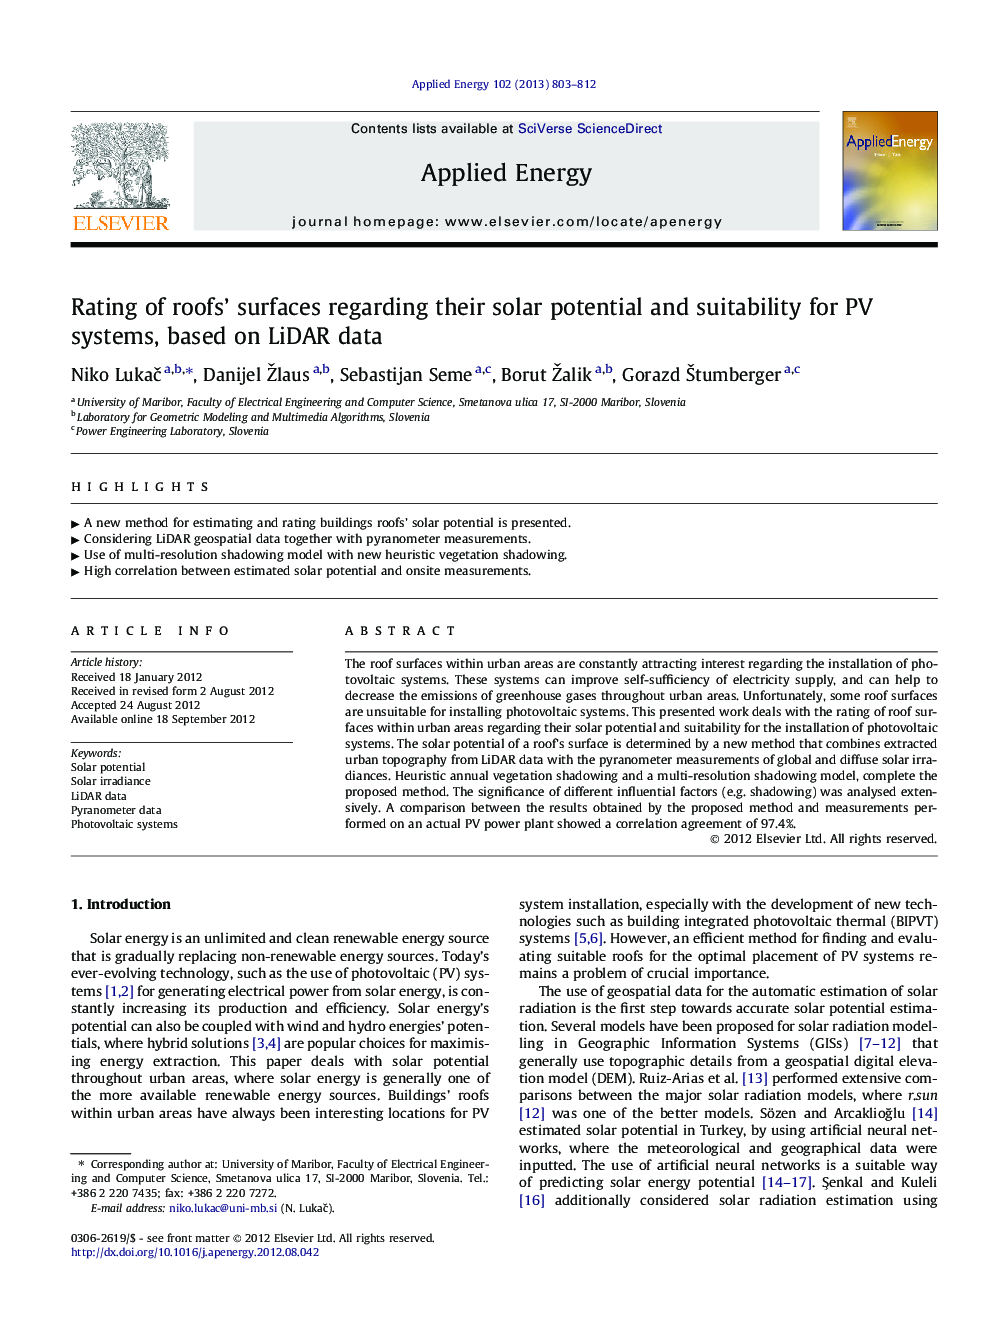 Rating of roofs' surfaces regarding their solar potential and suitability for PV systems, based on LiDAR data